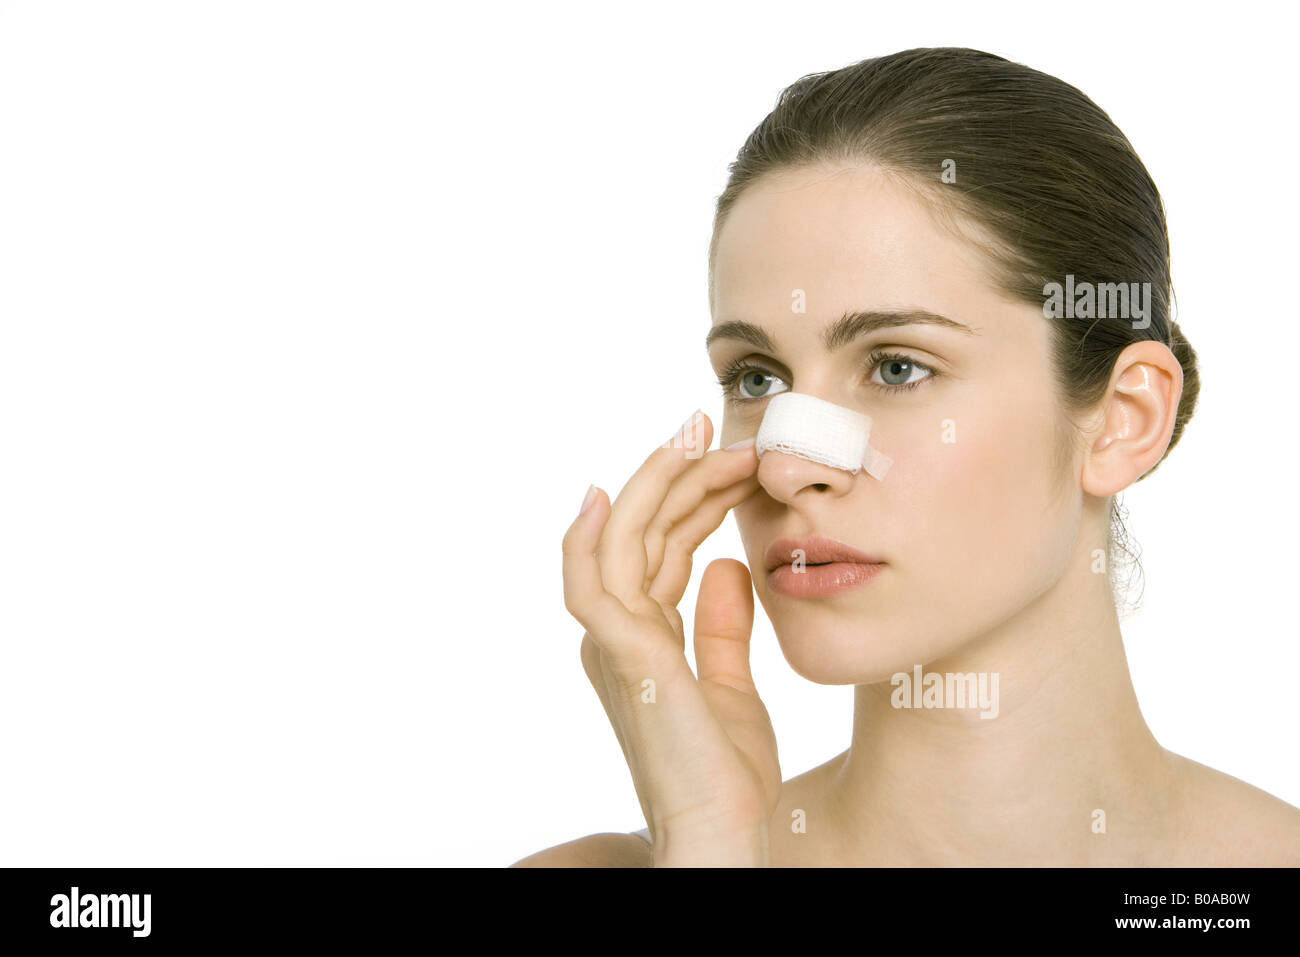 Young woman with bandage on nose, looking away Stock Photo